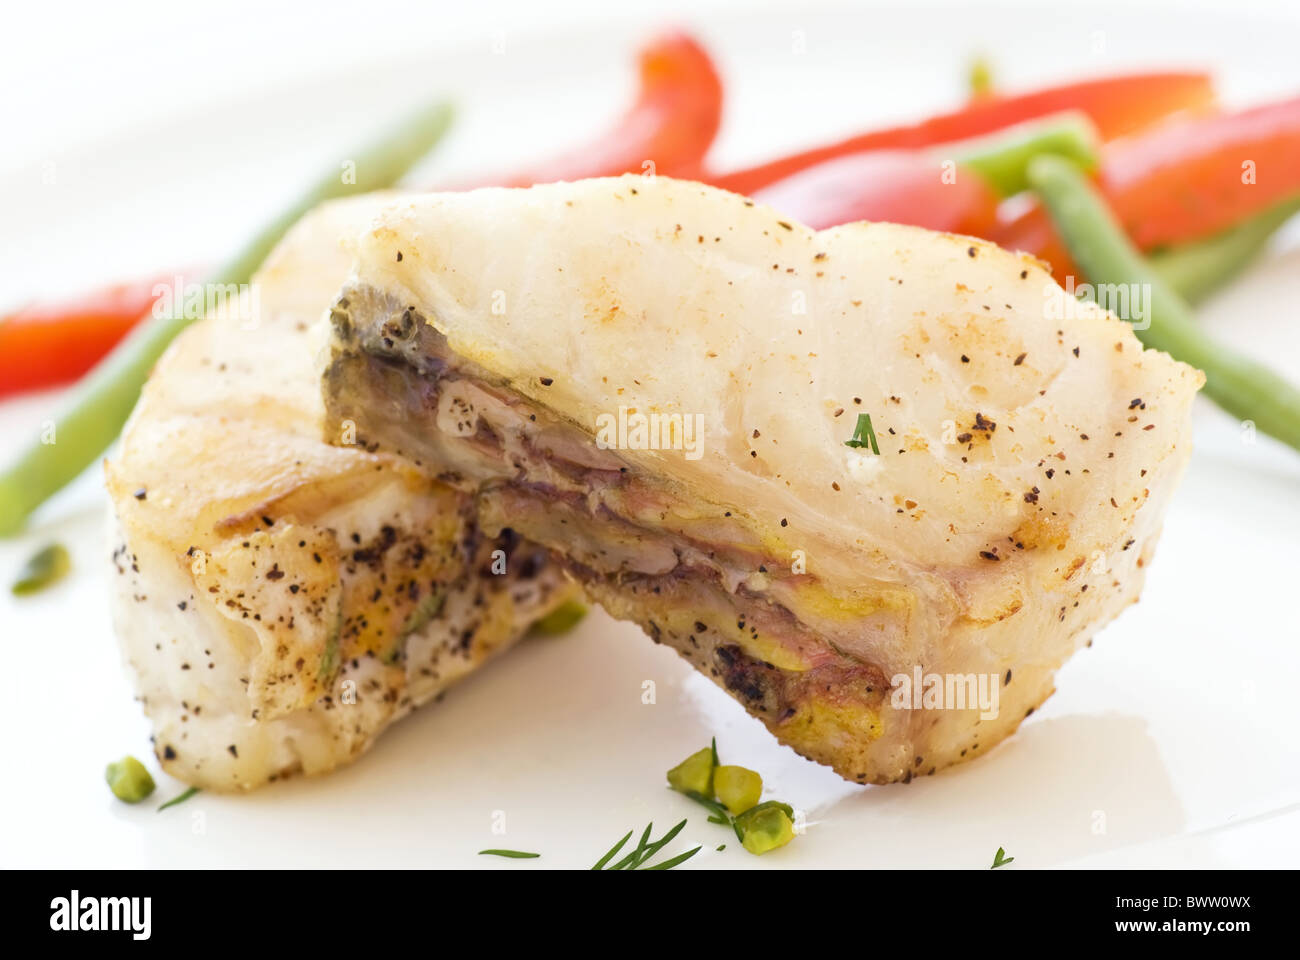 Parrot fish steak with vegetables as closeup on a white plate Stock Photo